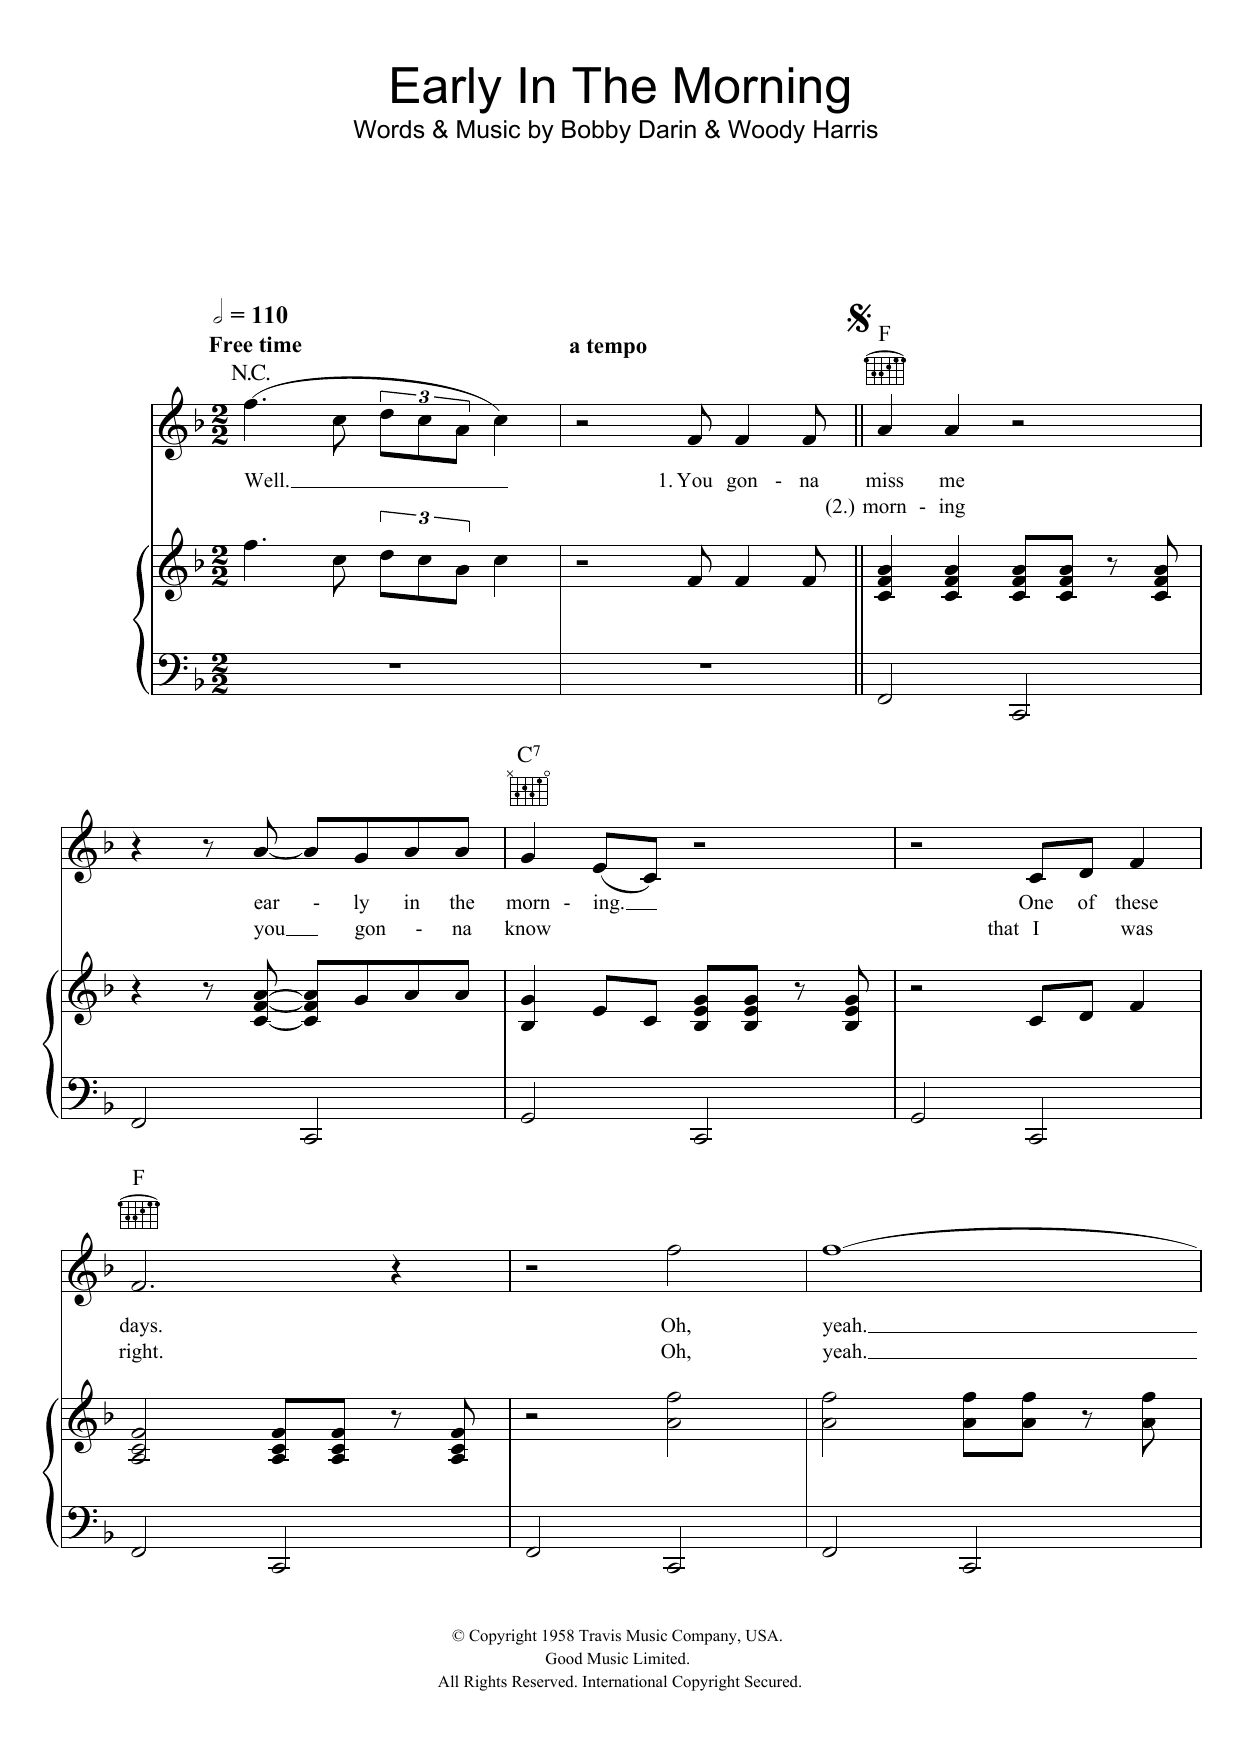 Early In The Morning sheet music